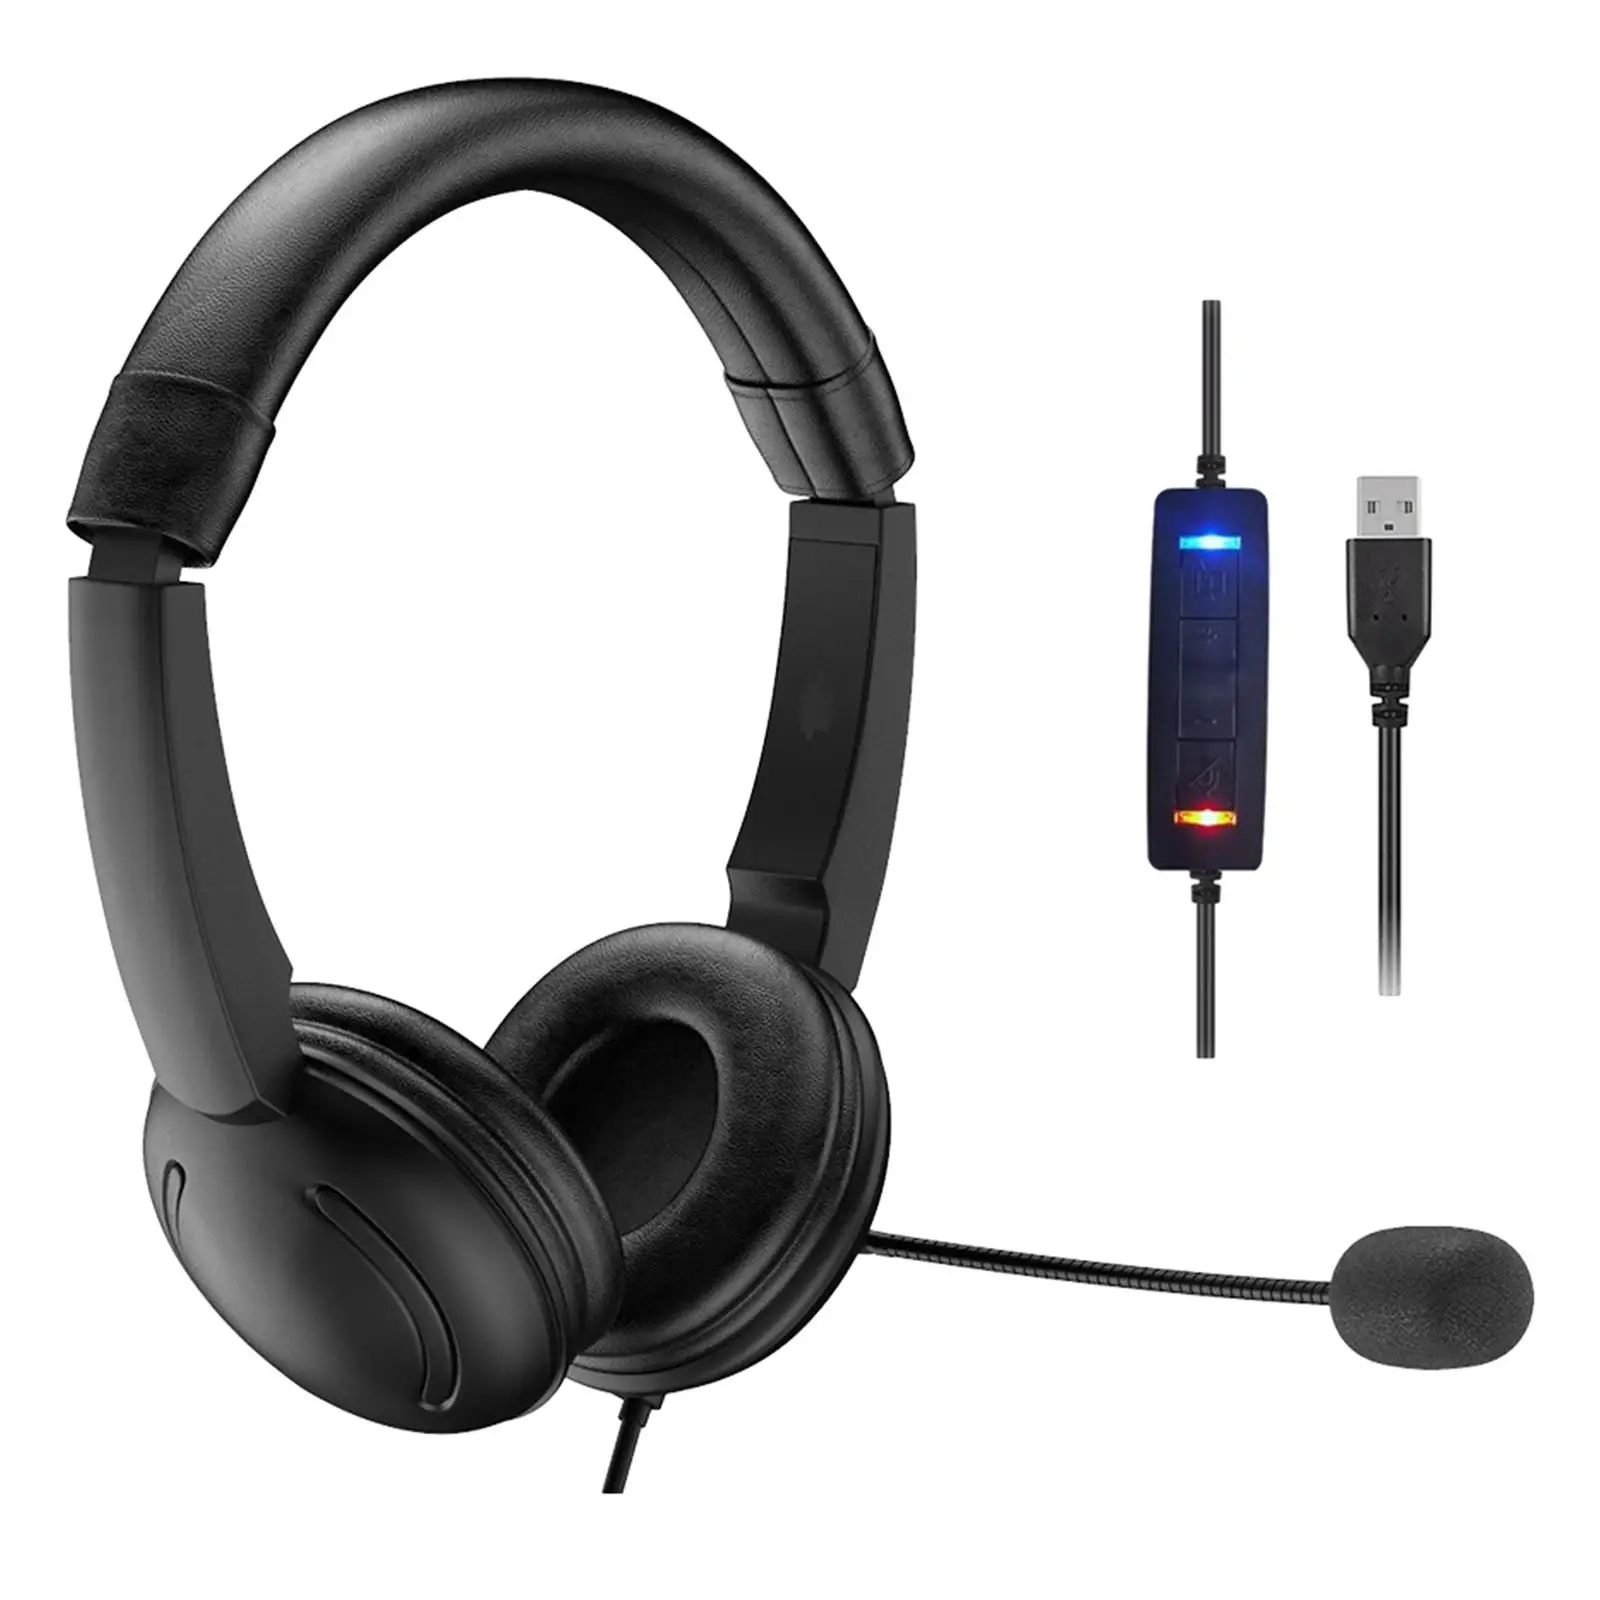 USB Headset Premium Plug and Play Comfort with in Line Controls Speaker Headphones for Home Laptop PC Call Center Video Meetings